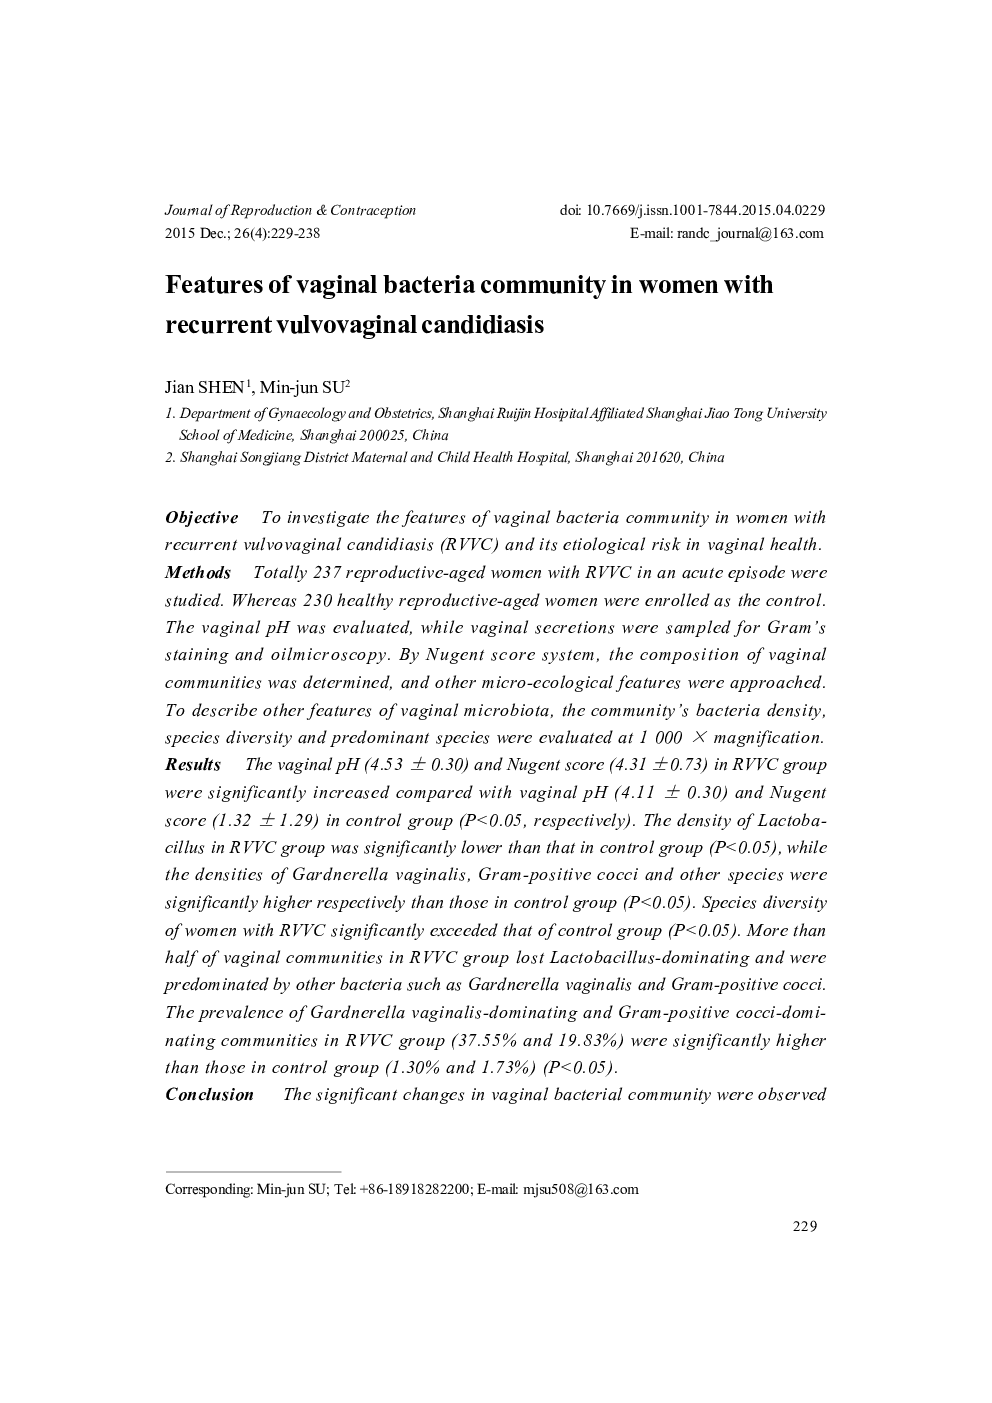 Features of vaginal bacteria community in women with recurrent vulvovaginal candidiasis